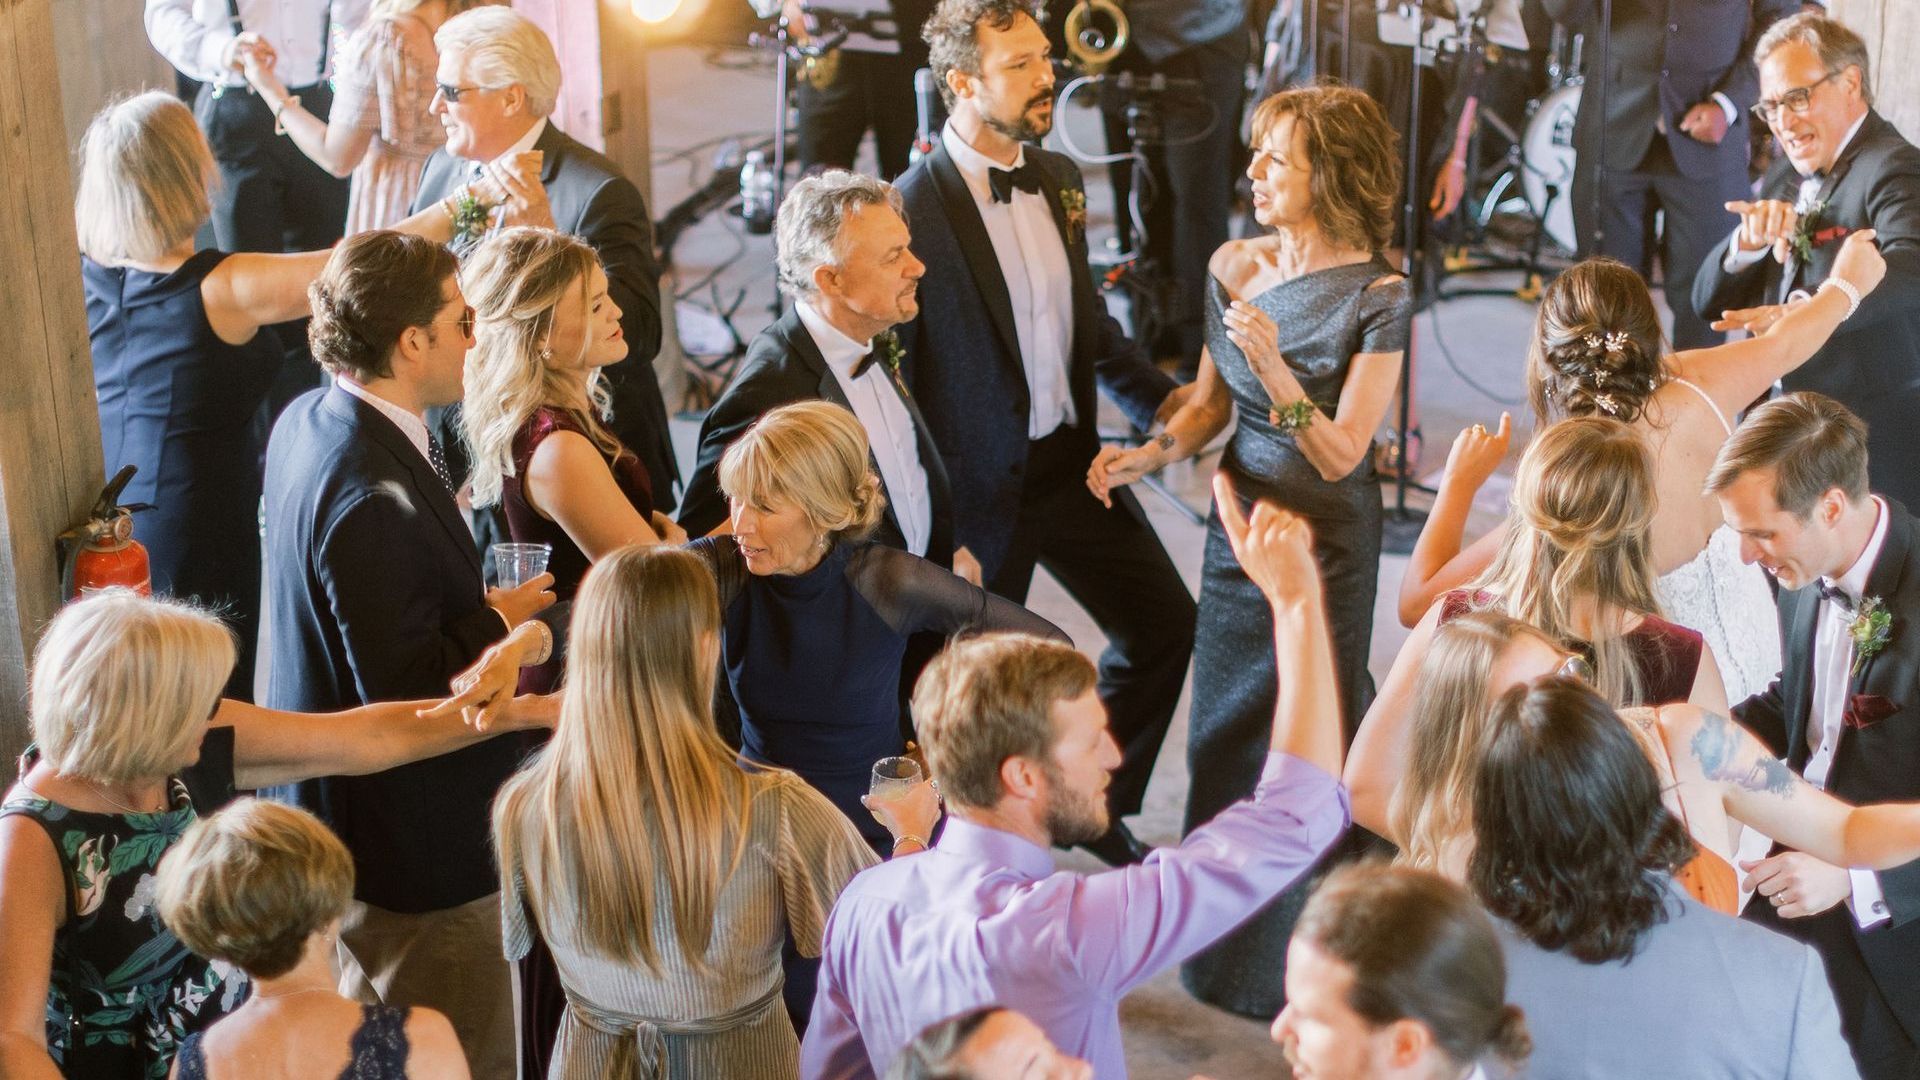 a large group of people are dancing at a wedding reception .